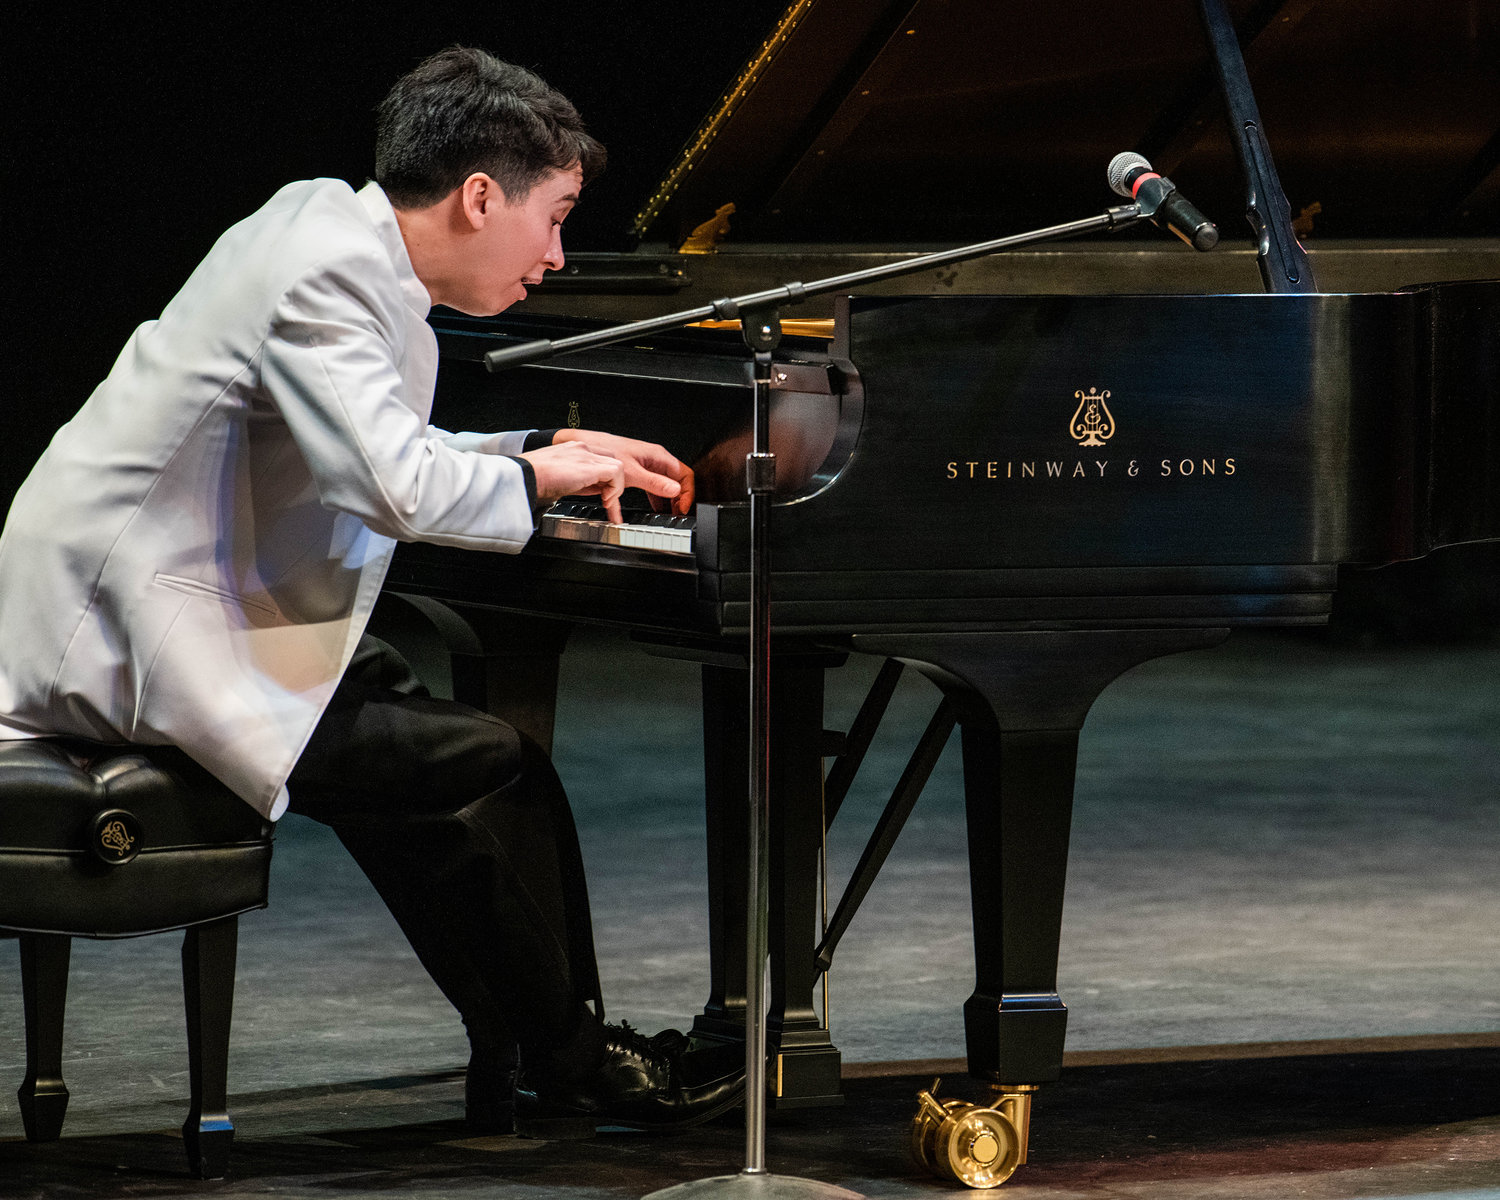 Charlie Albright performs for an audience on a nine-foot Steinway & Sons grand piano inside the Corbet Theatre Friday evening with proceeds going to the Charlie Albright Scholarship at Centralia College.